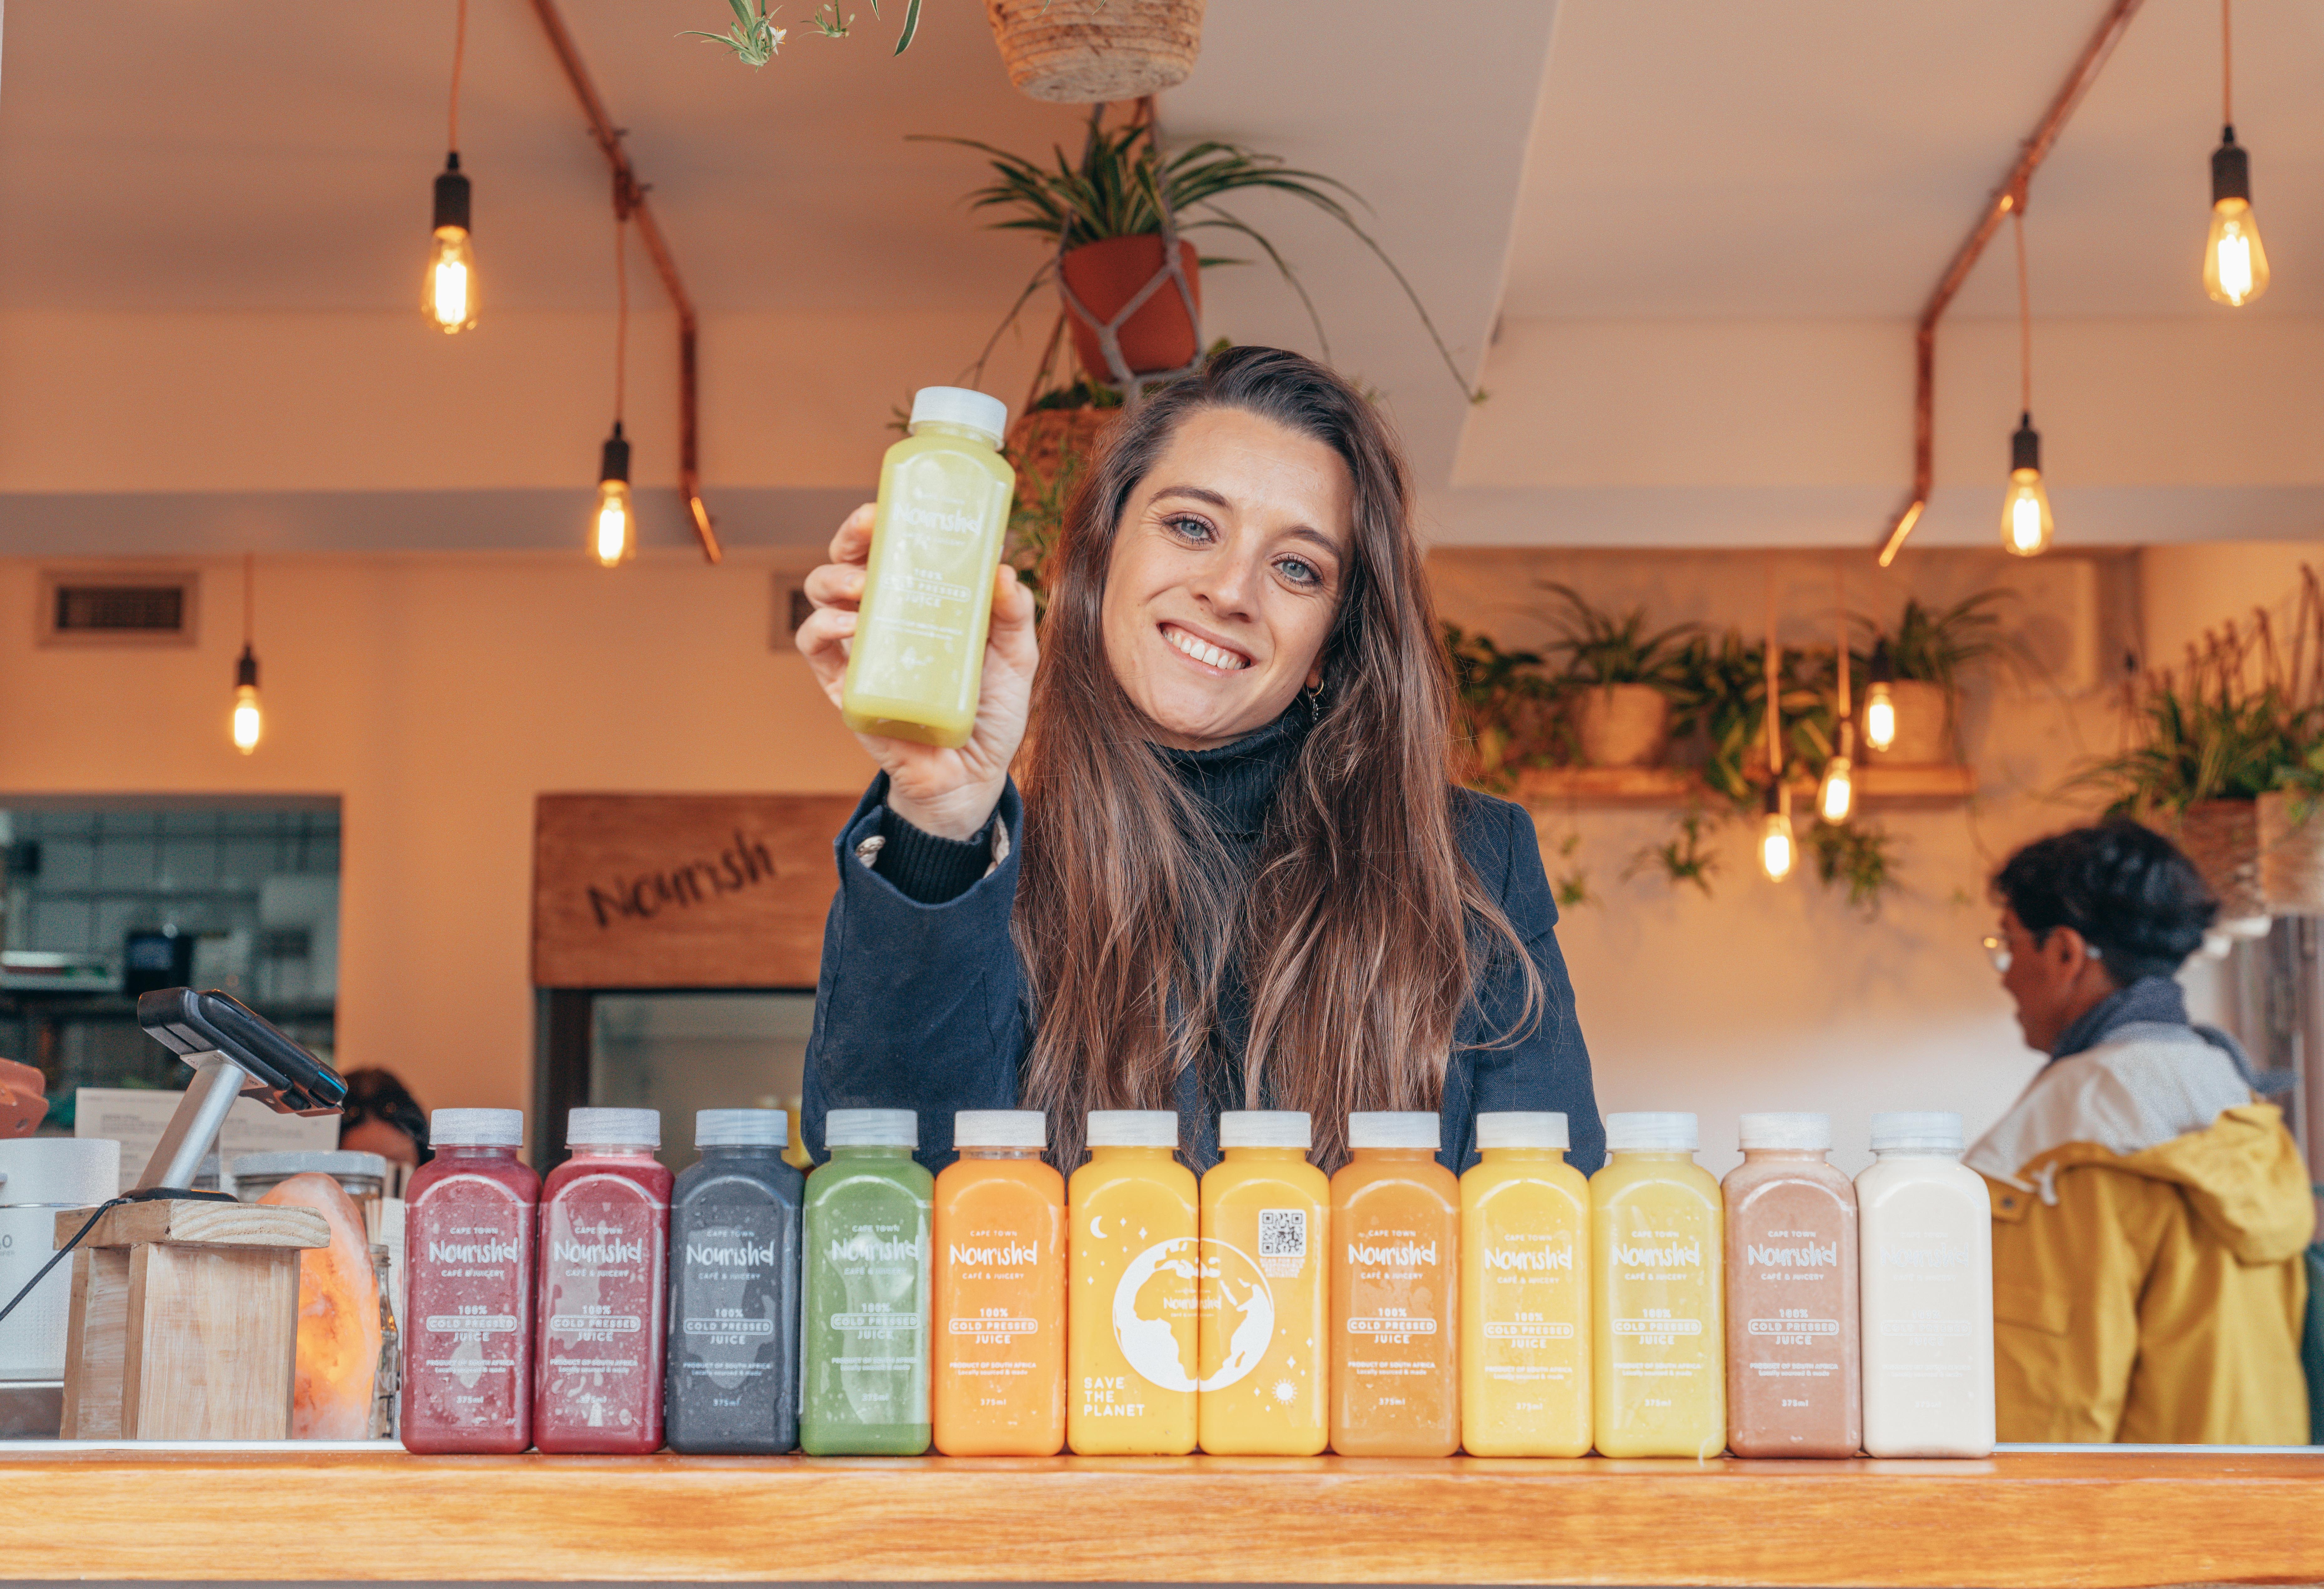 You are currently viewing Green Living Made Easy with Nourish’d CAFÉ & JUICERY